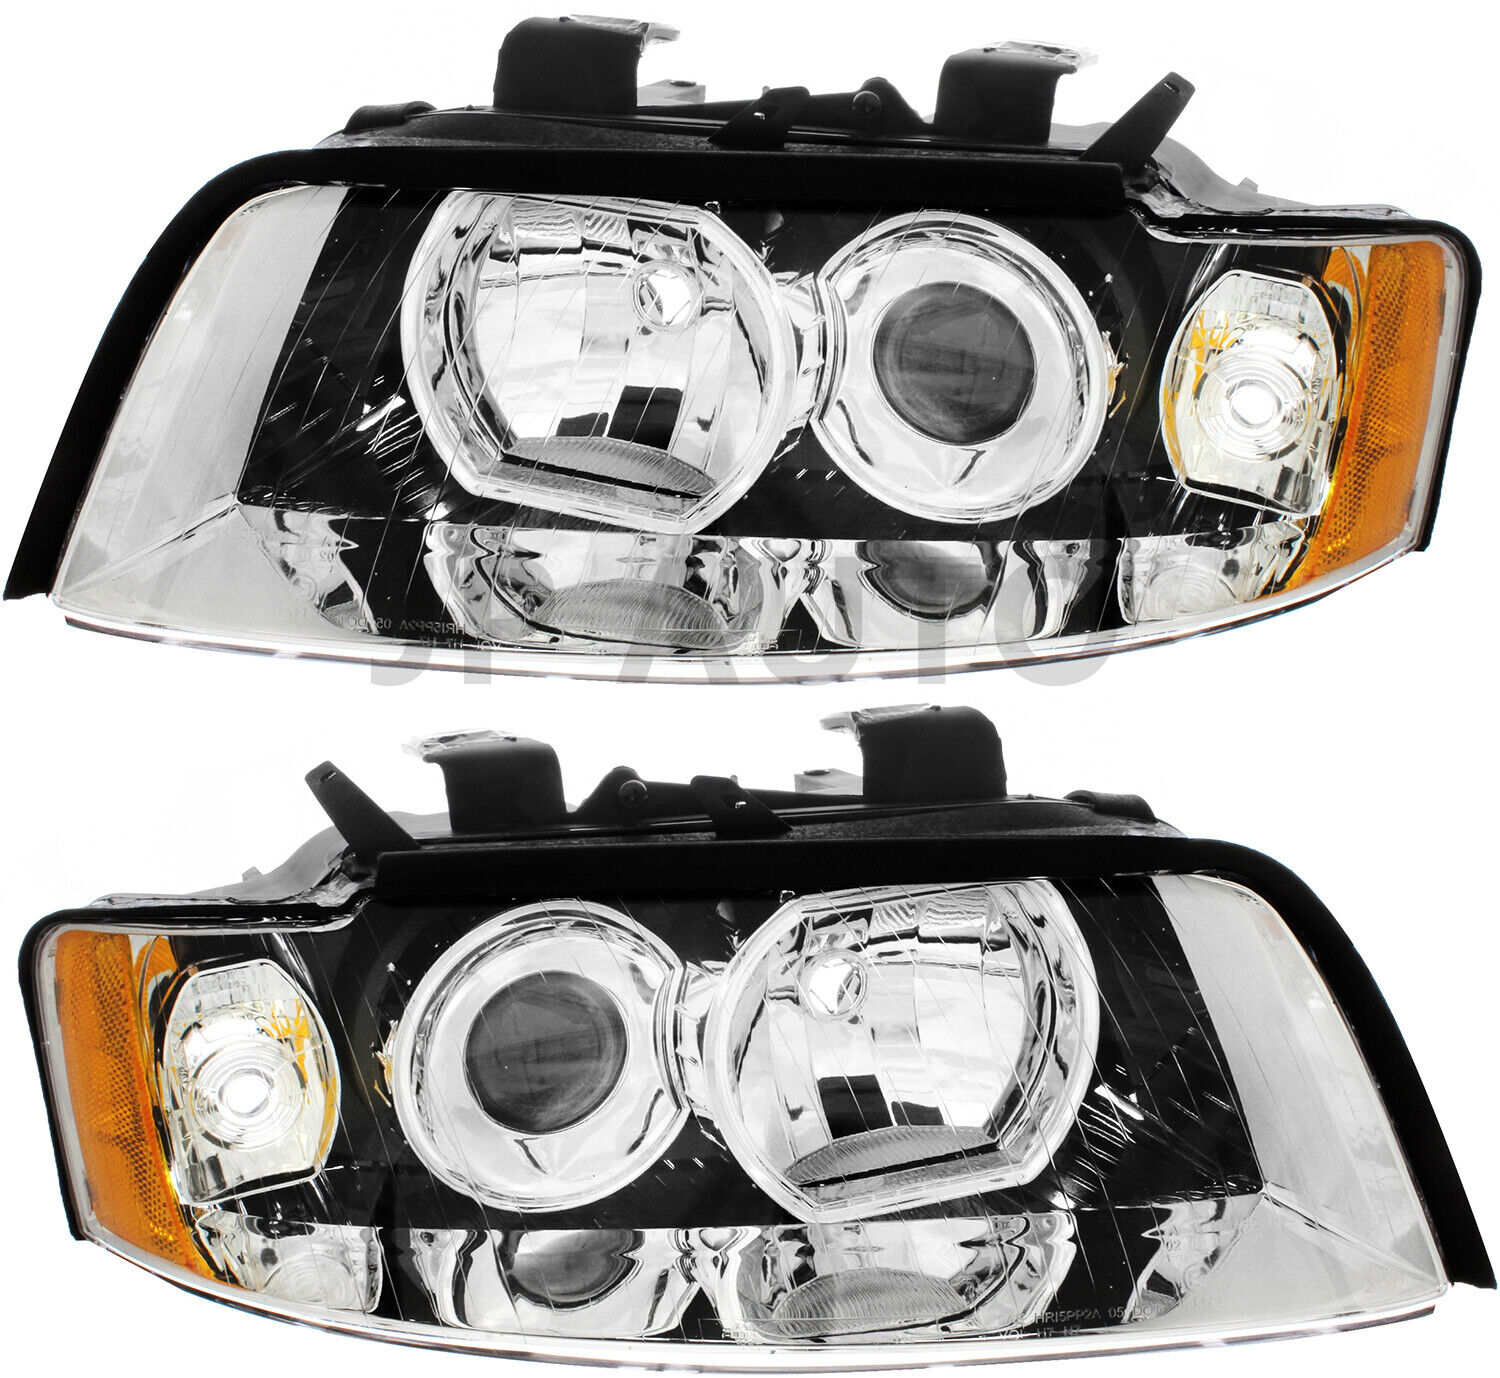 For 2002-2005 Audi A4 S4 Headlight Halogen Set Driver and Passenger Side